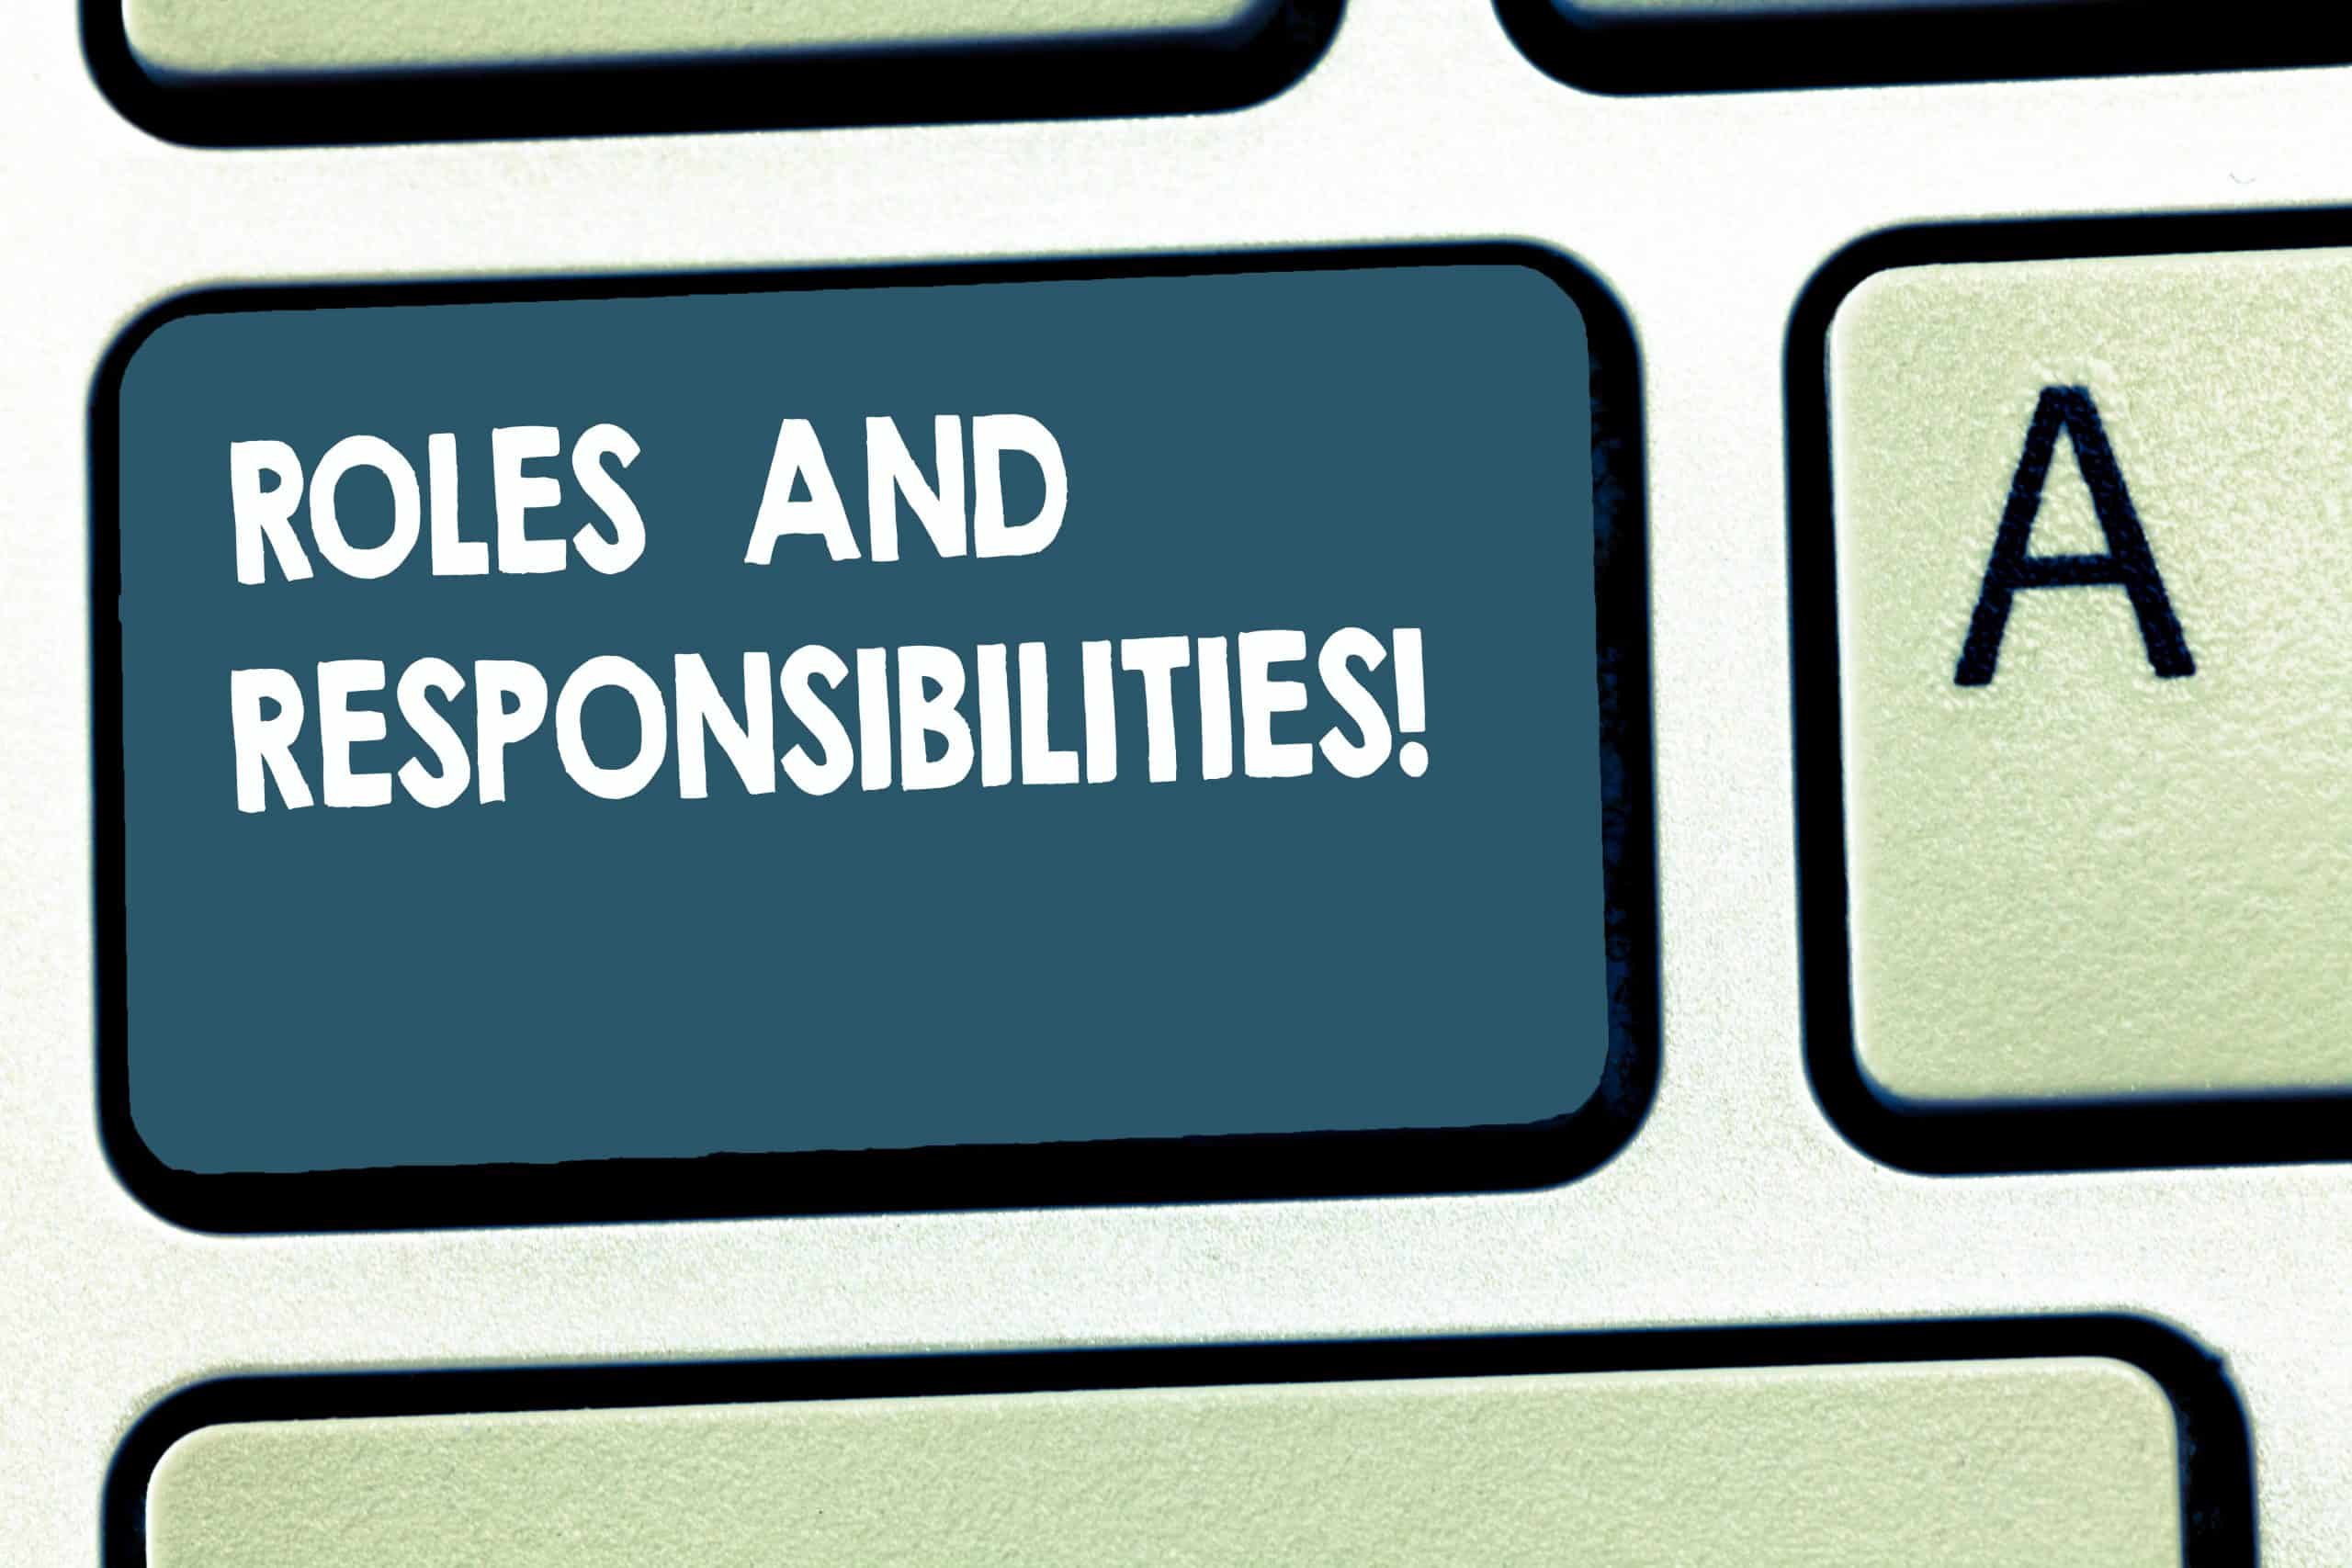 roles and responsibilities - THE EDUCATION HUB